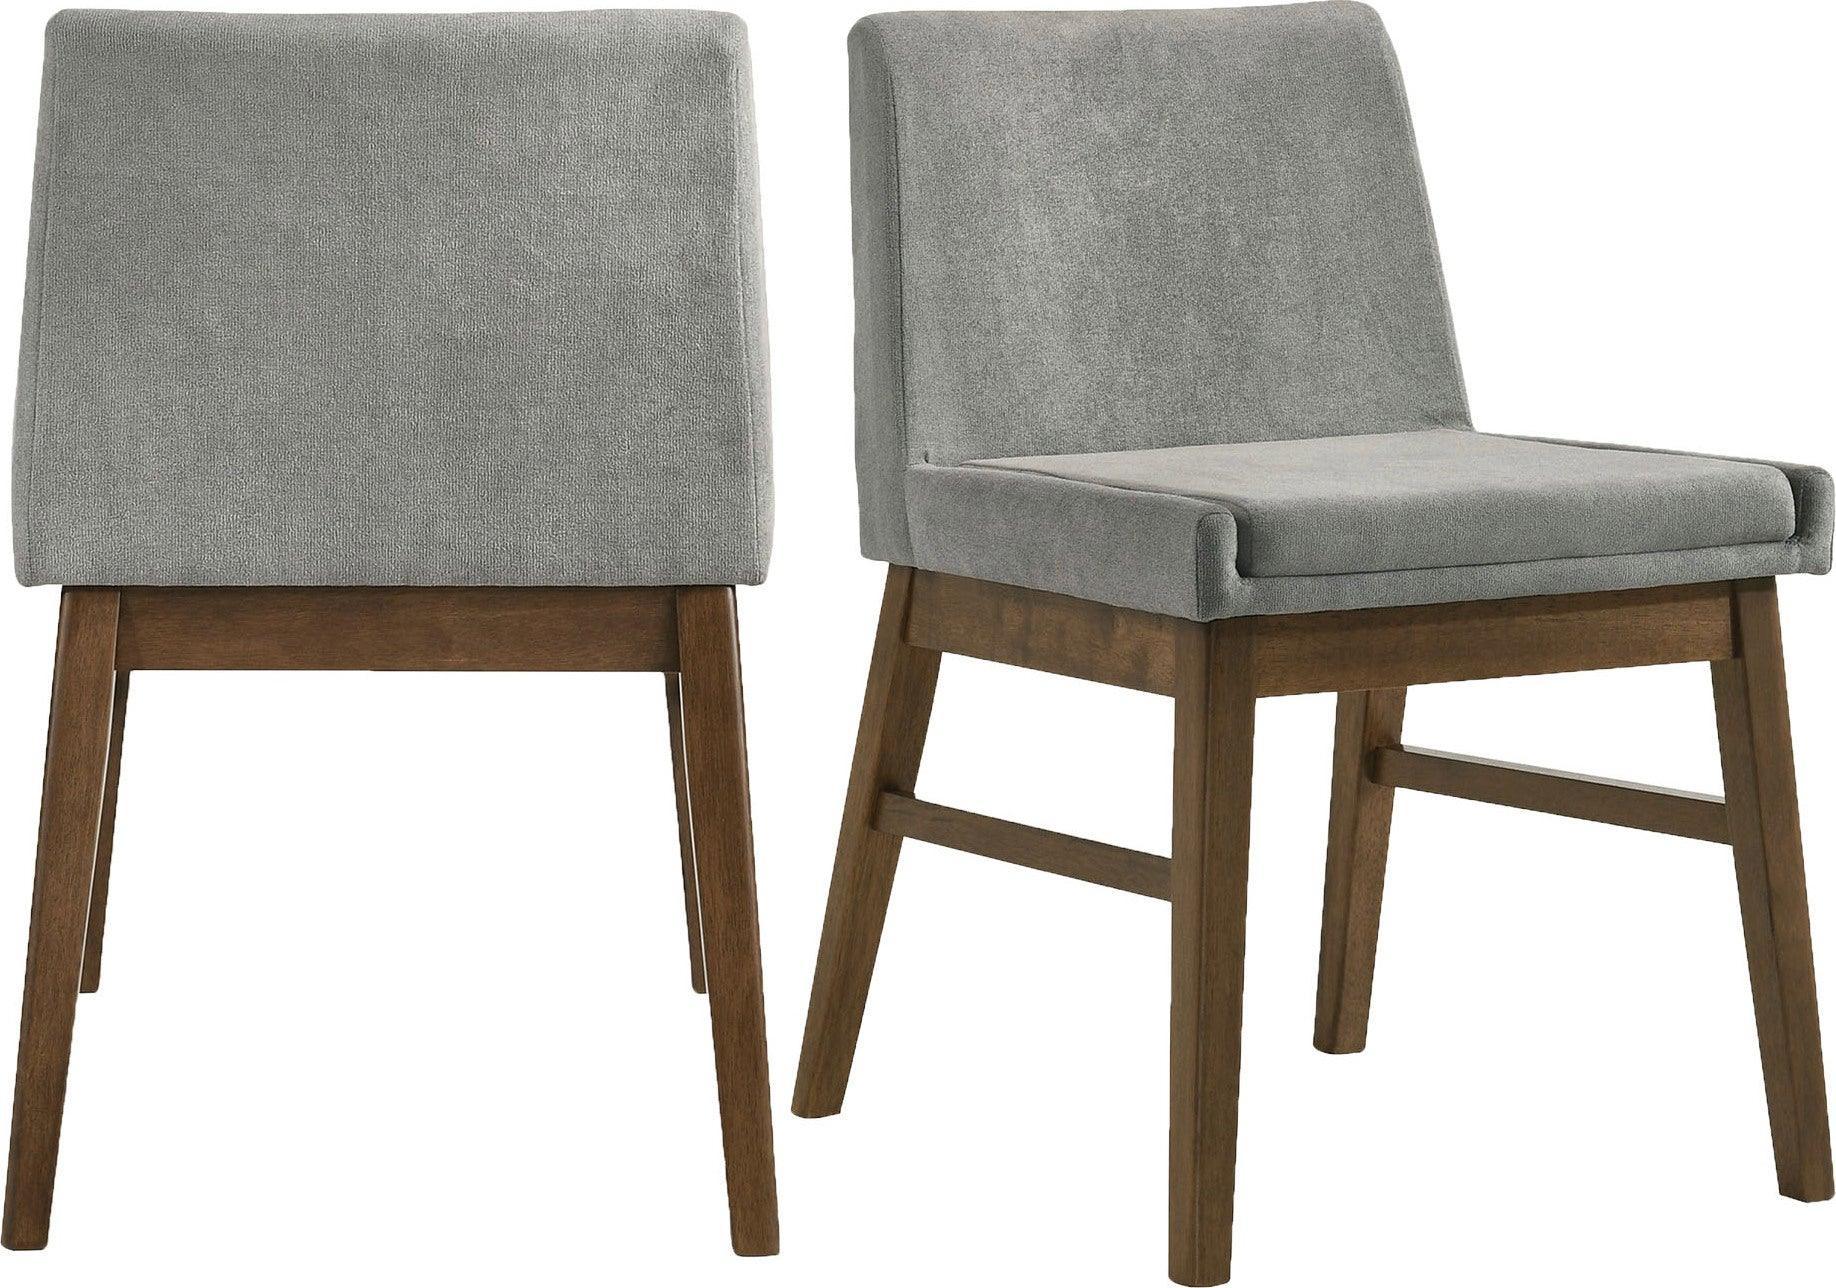 Elements Dining Chairs - Wynden Standard Height Dining Side Chair Set (Set of 2)